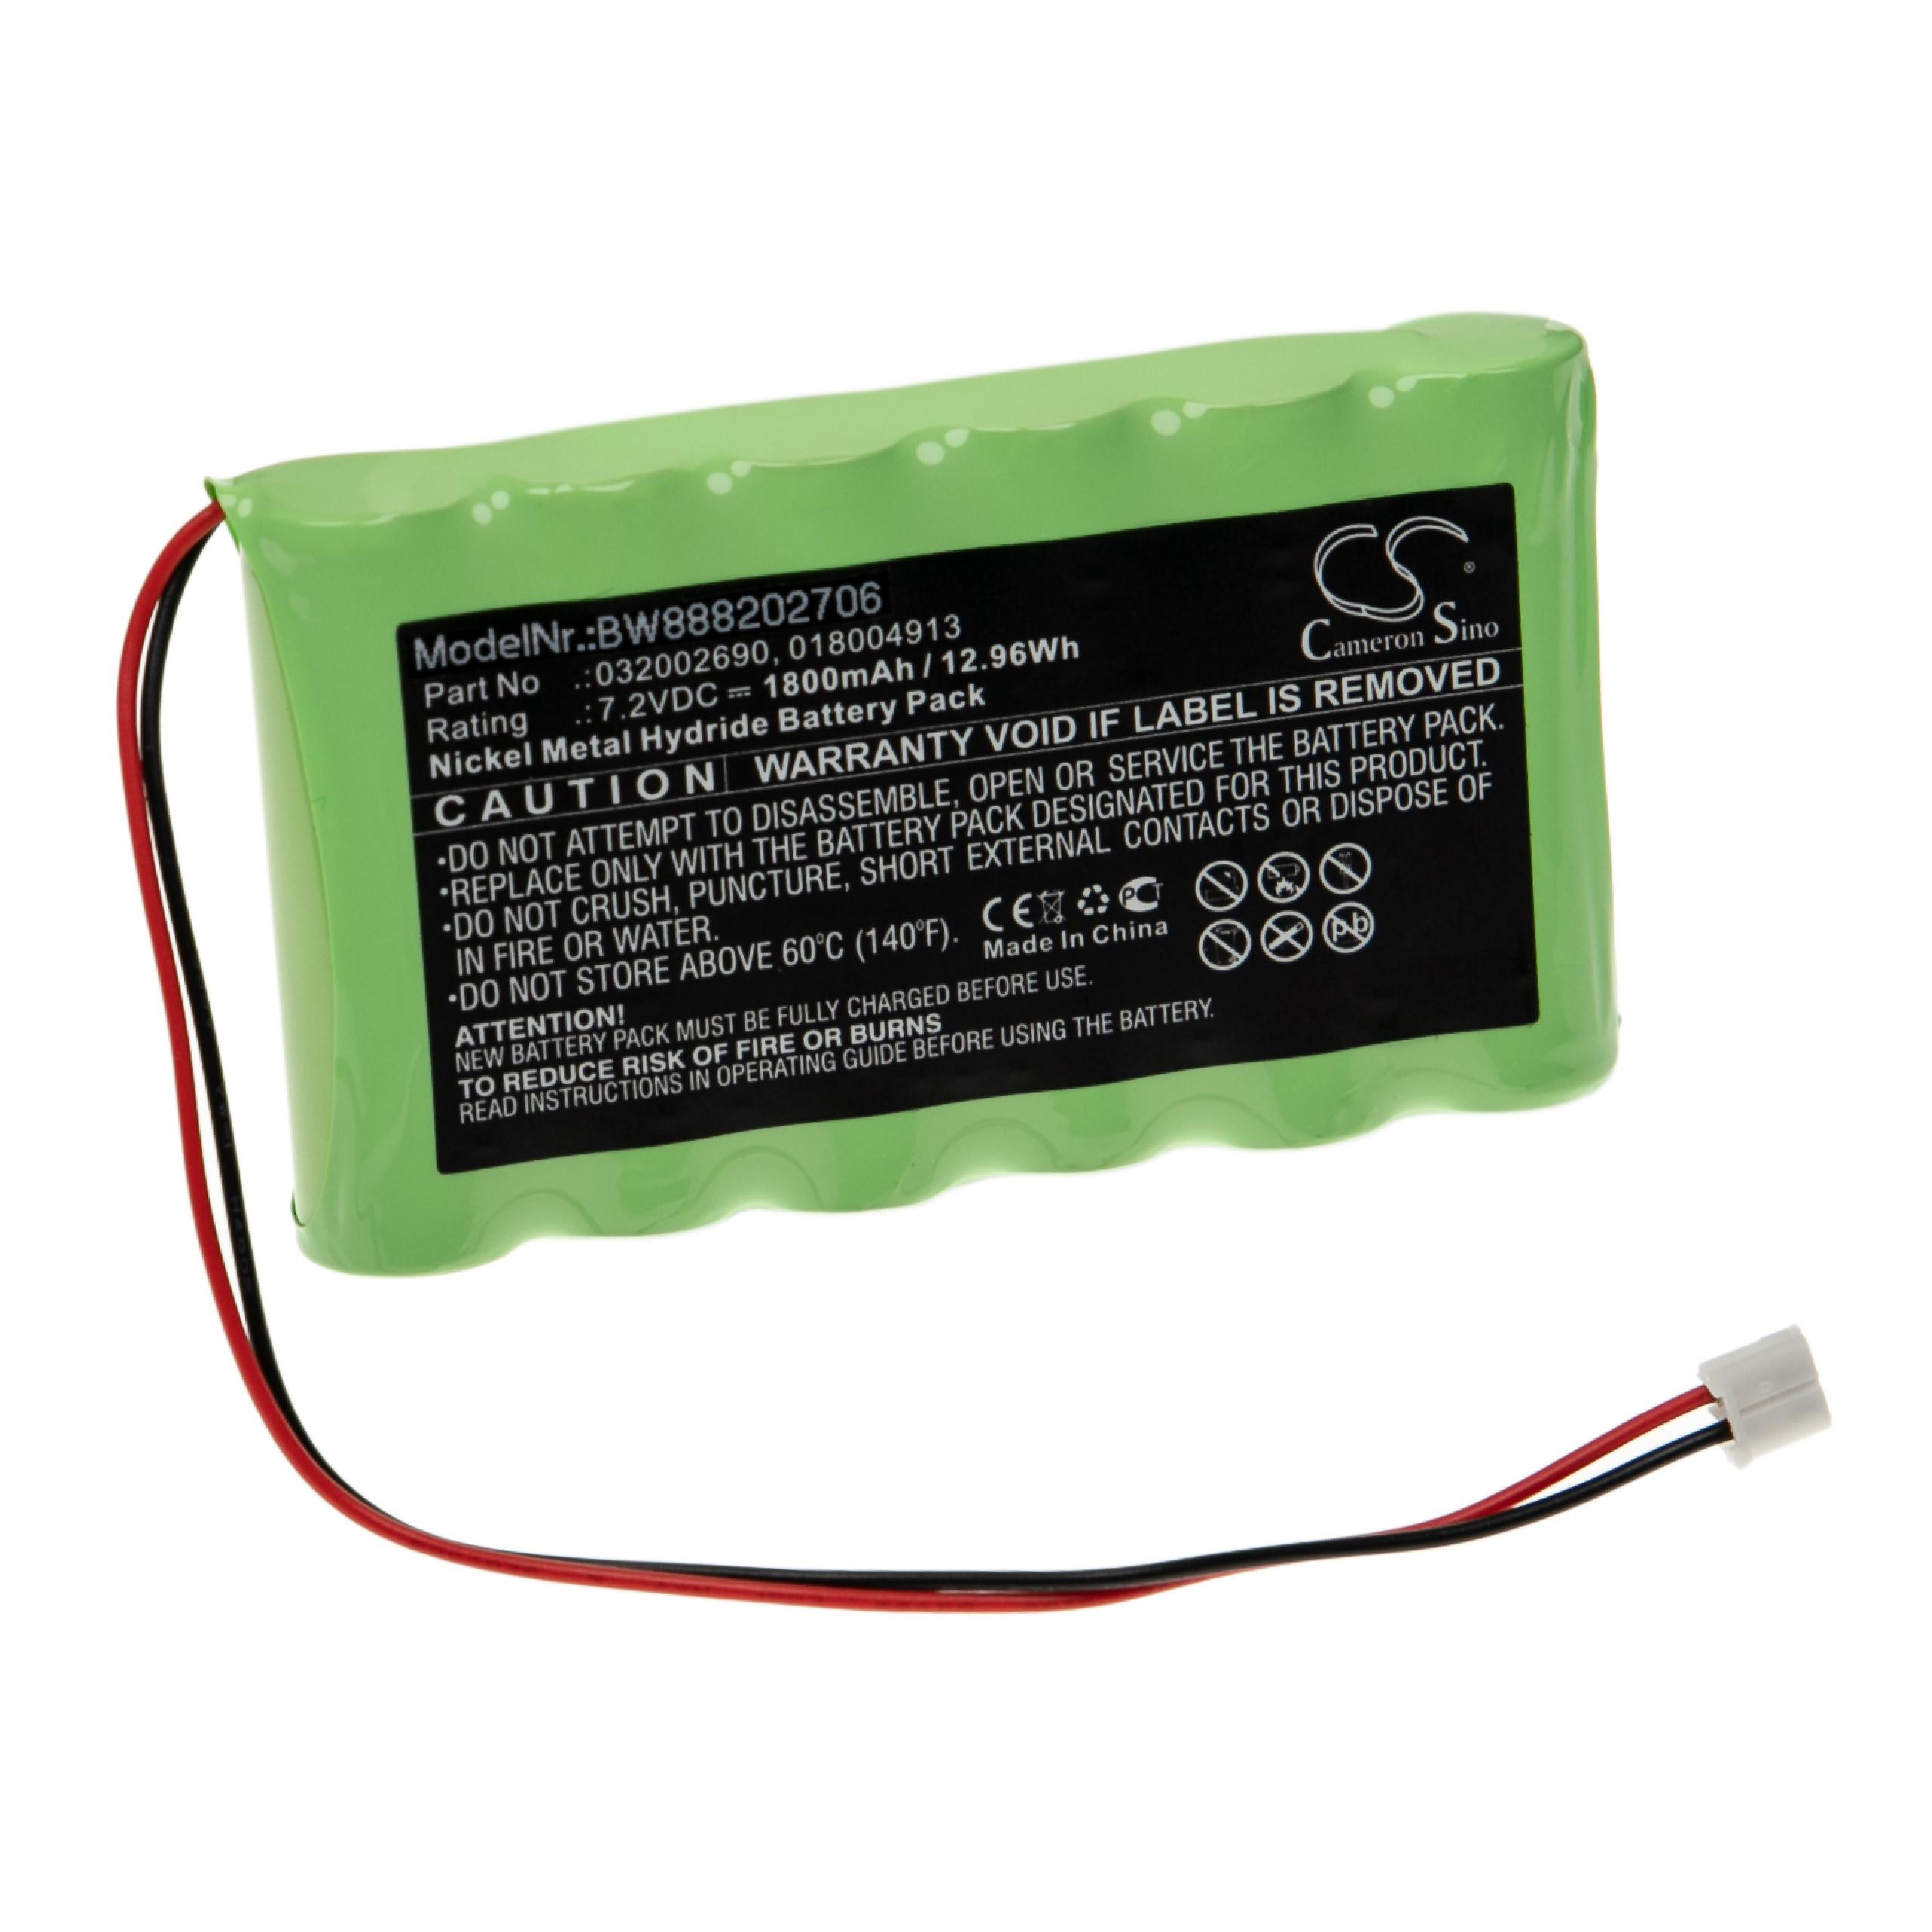 Batterie remplace Compex 4H-AA1500, 941213, 941210 1500mAh 4,8V